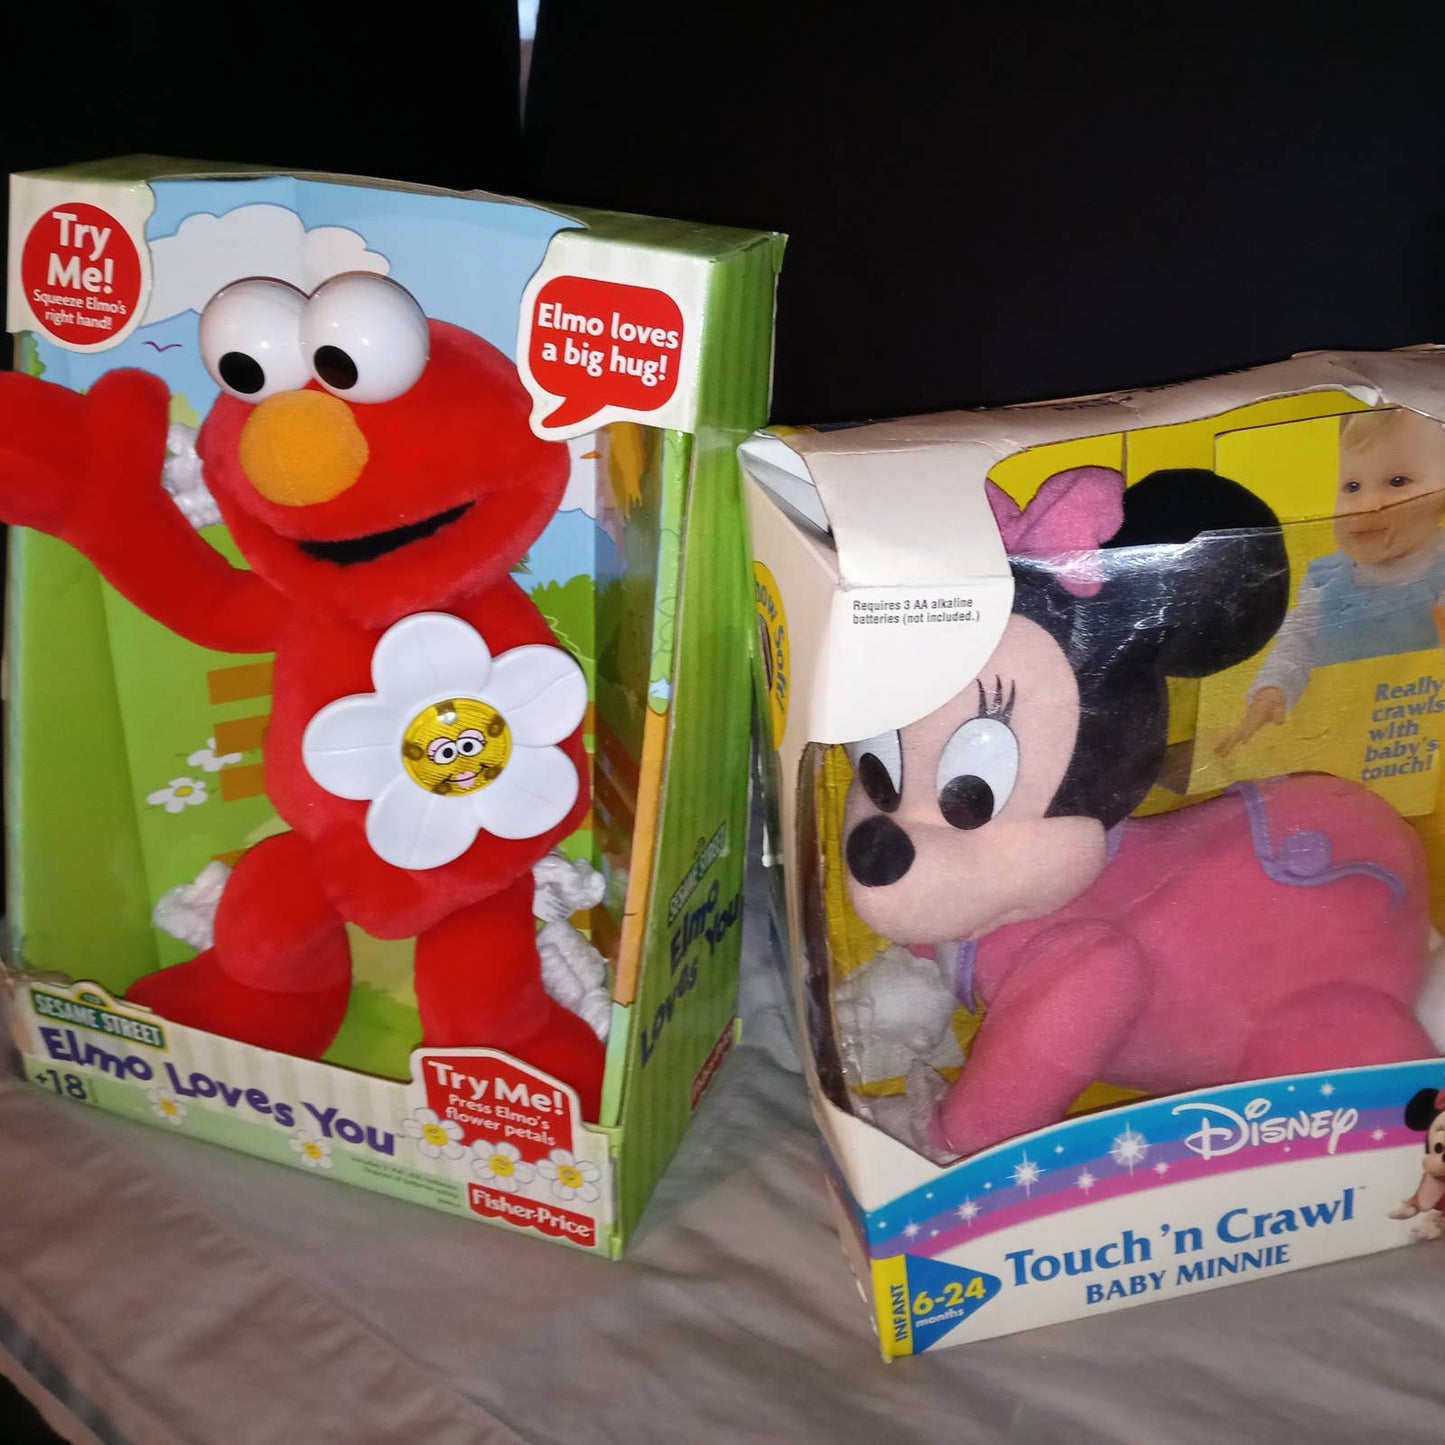 New Elmo Loves You AND Baby Minnie Touch and Crawl